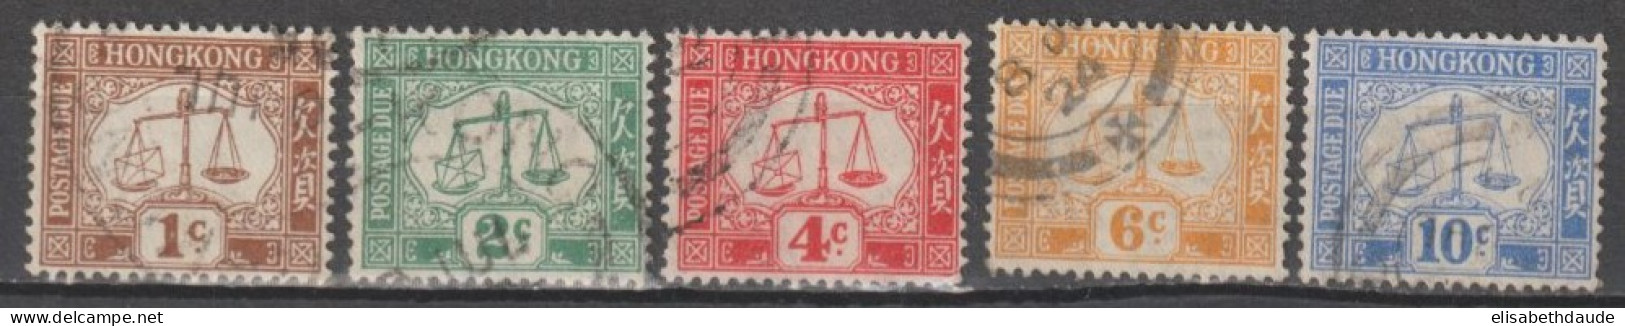 HONG KONG (CHINA) - 1924 - TAXE SERIE COMPLETE YVERT N°1/5 OBLITERES  - COTE = 50 EUR - Postage Due